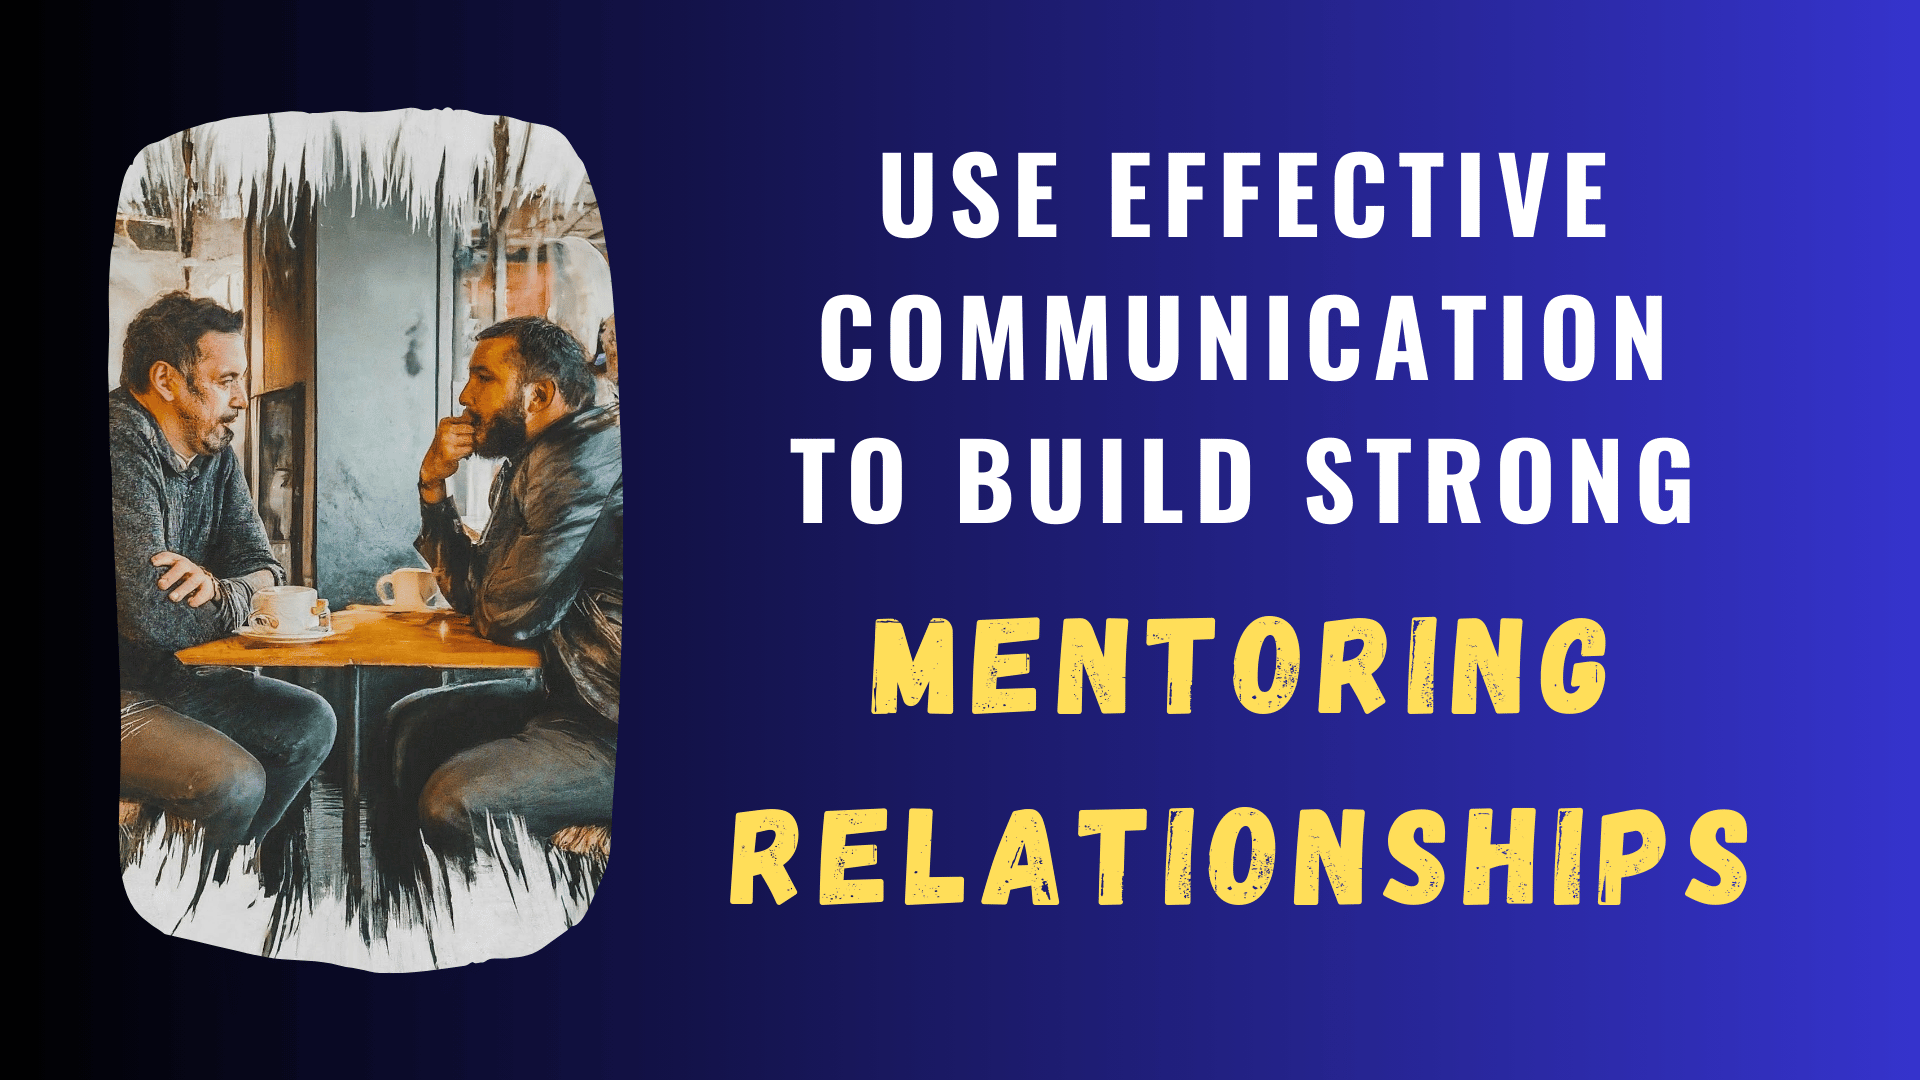 Use Effective Communication to Build Strong Mentoring Relationships